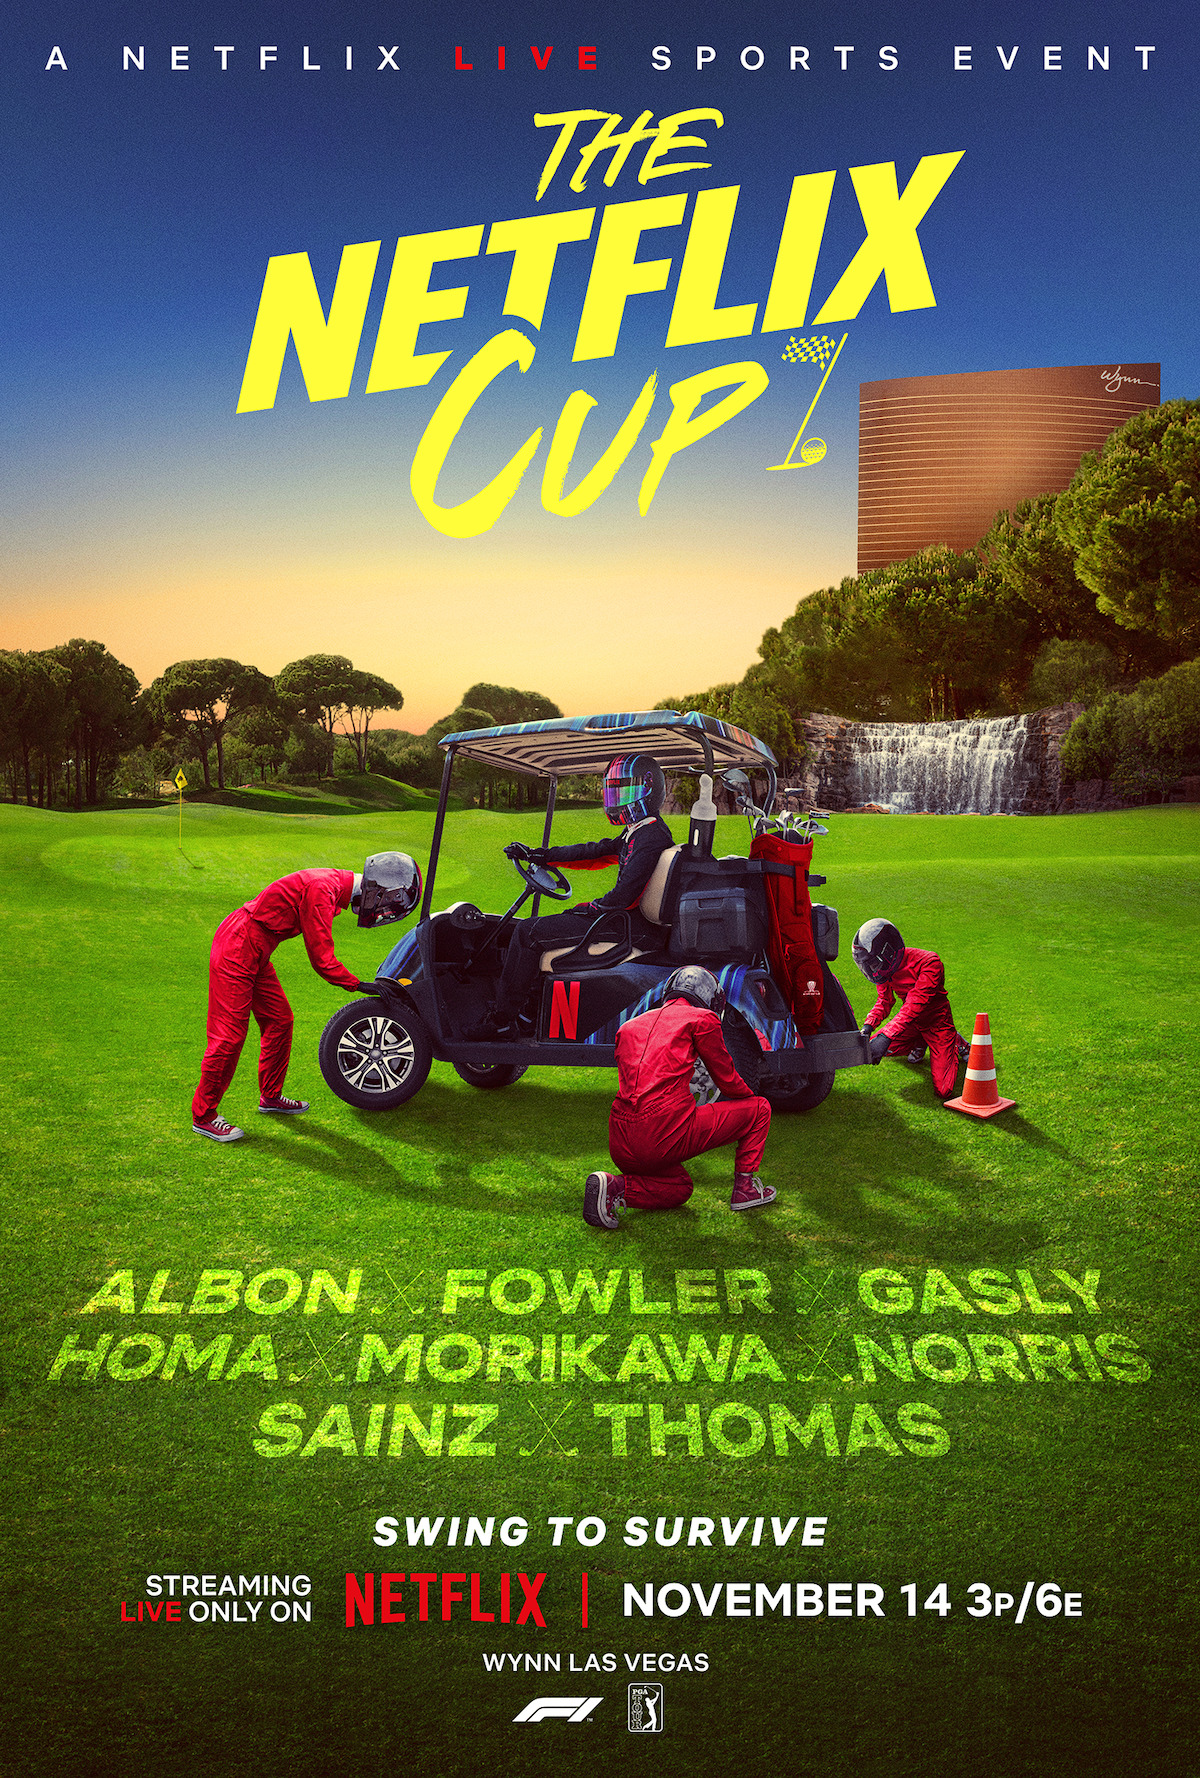 ‘The Netflix Cup’ key art. A pit crew in red jumpsuits surrounds a golf cart working to turn it around fast. ‘Swing to Survive’ Streaming live only on Netflix Nov. 14 3 p.m. PT /6 p.m. ET